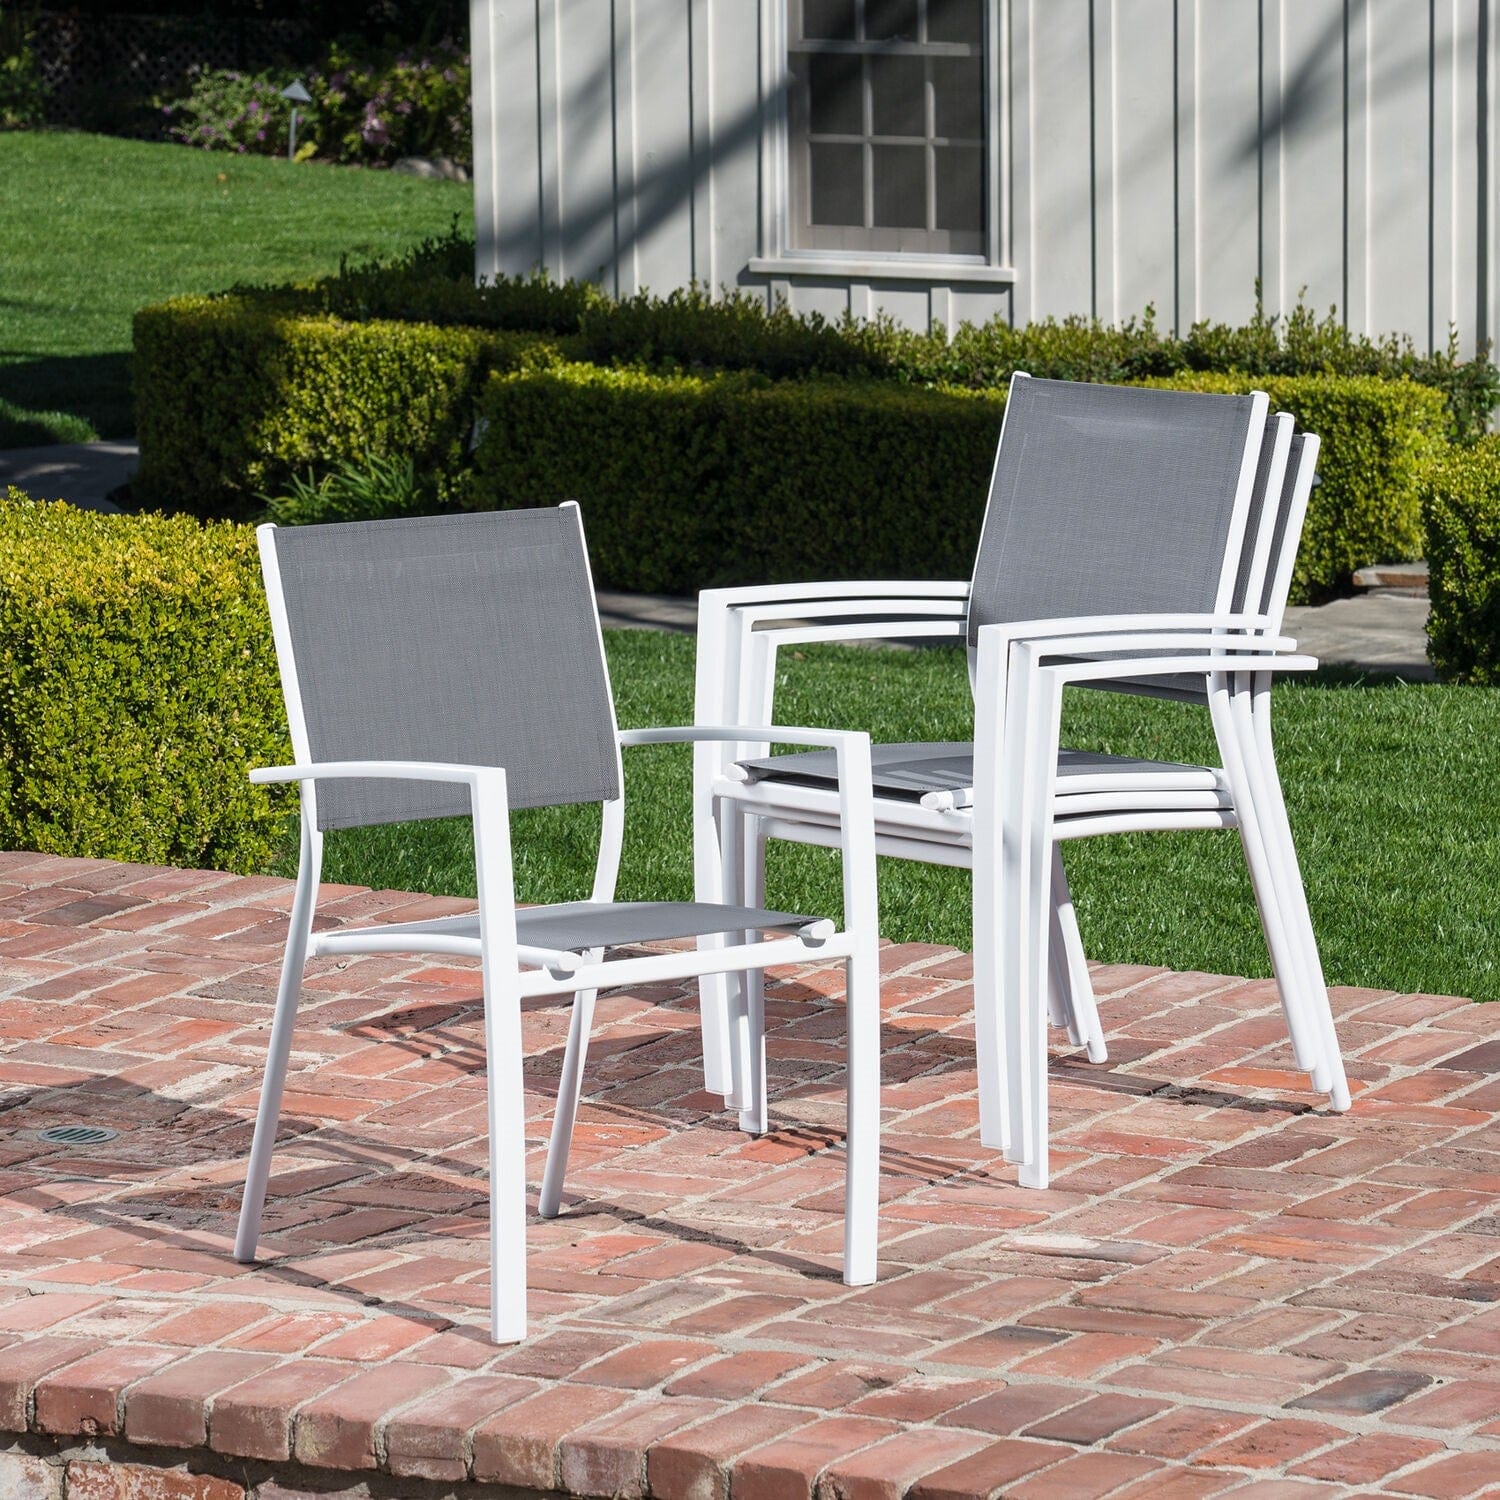 Hanover Fire Pit Chat Set Hanover- Naples 5-Piece Fire Pit Chat Set: 4 Sling Chairs and 40,000 BTU Tile-Top Fire Pit Table w/ Burner Cover, White/Gray | 23x22 | NAPLES5PCSLFP-WG